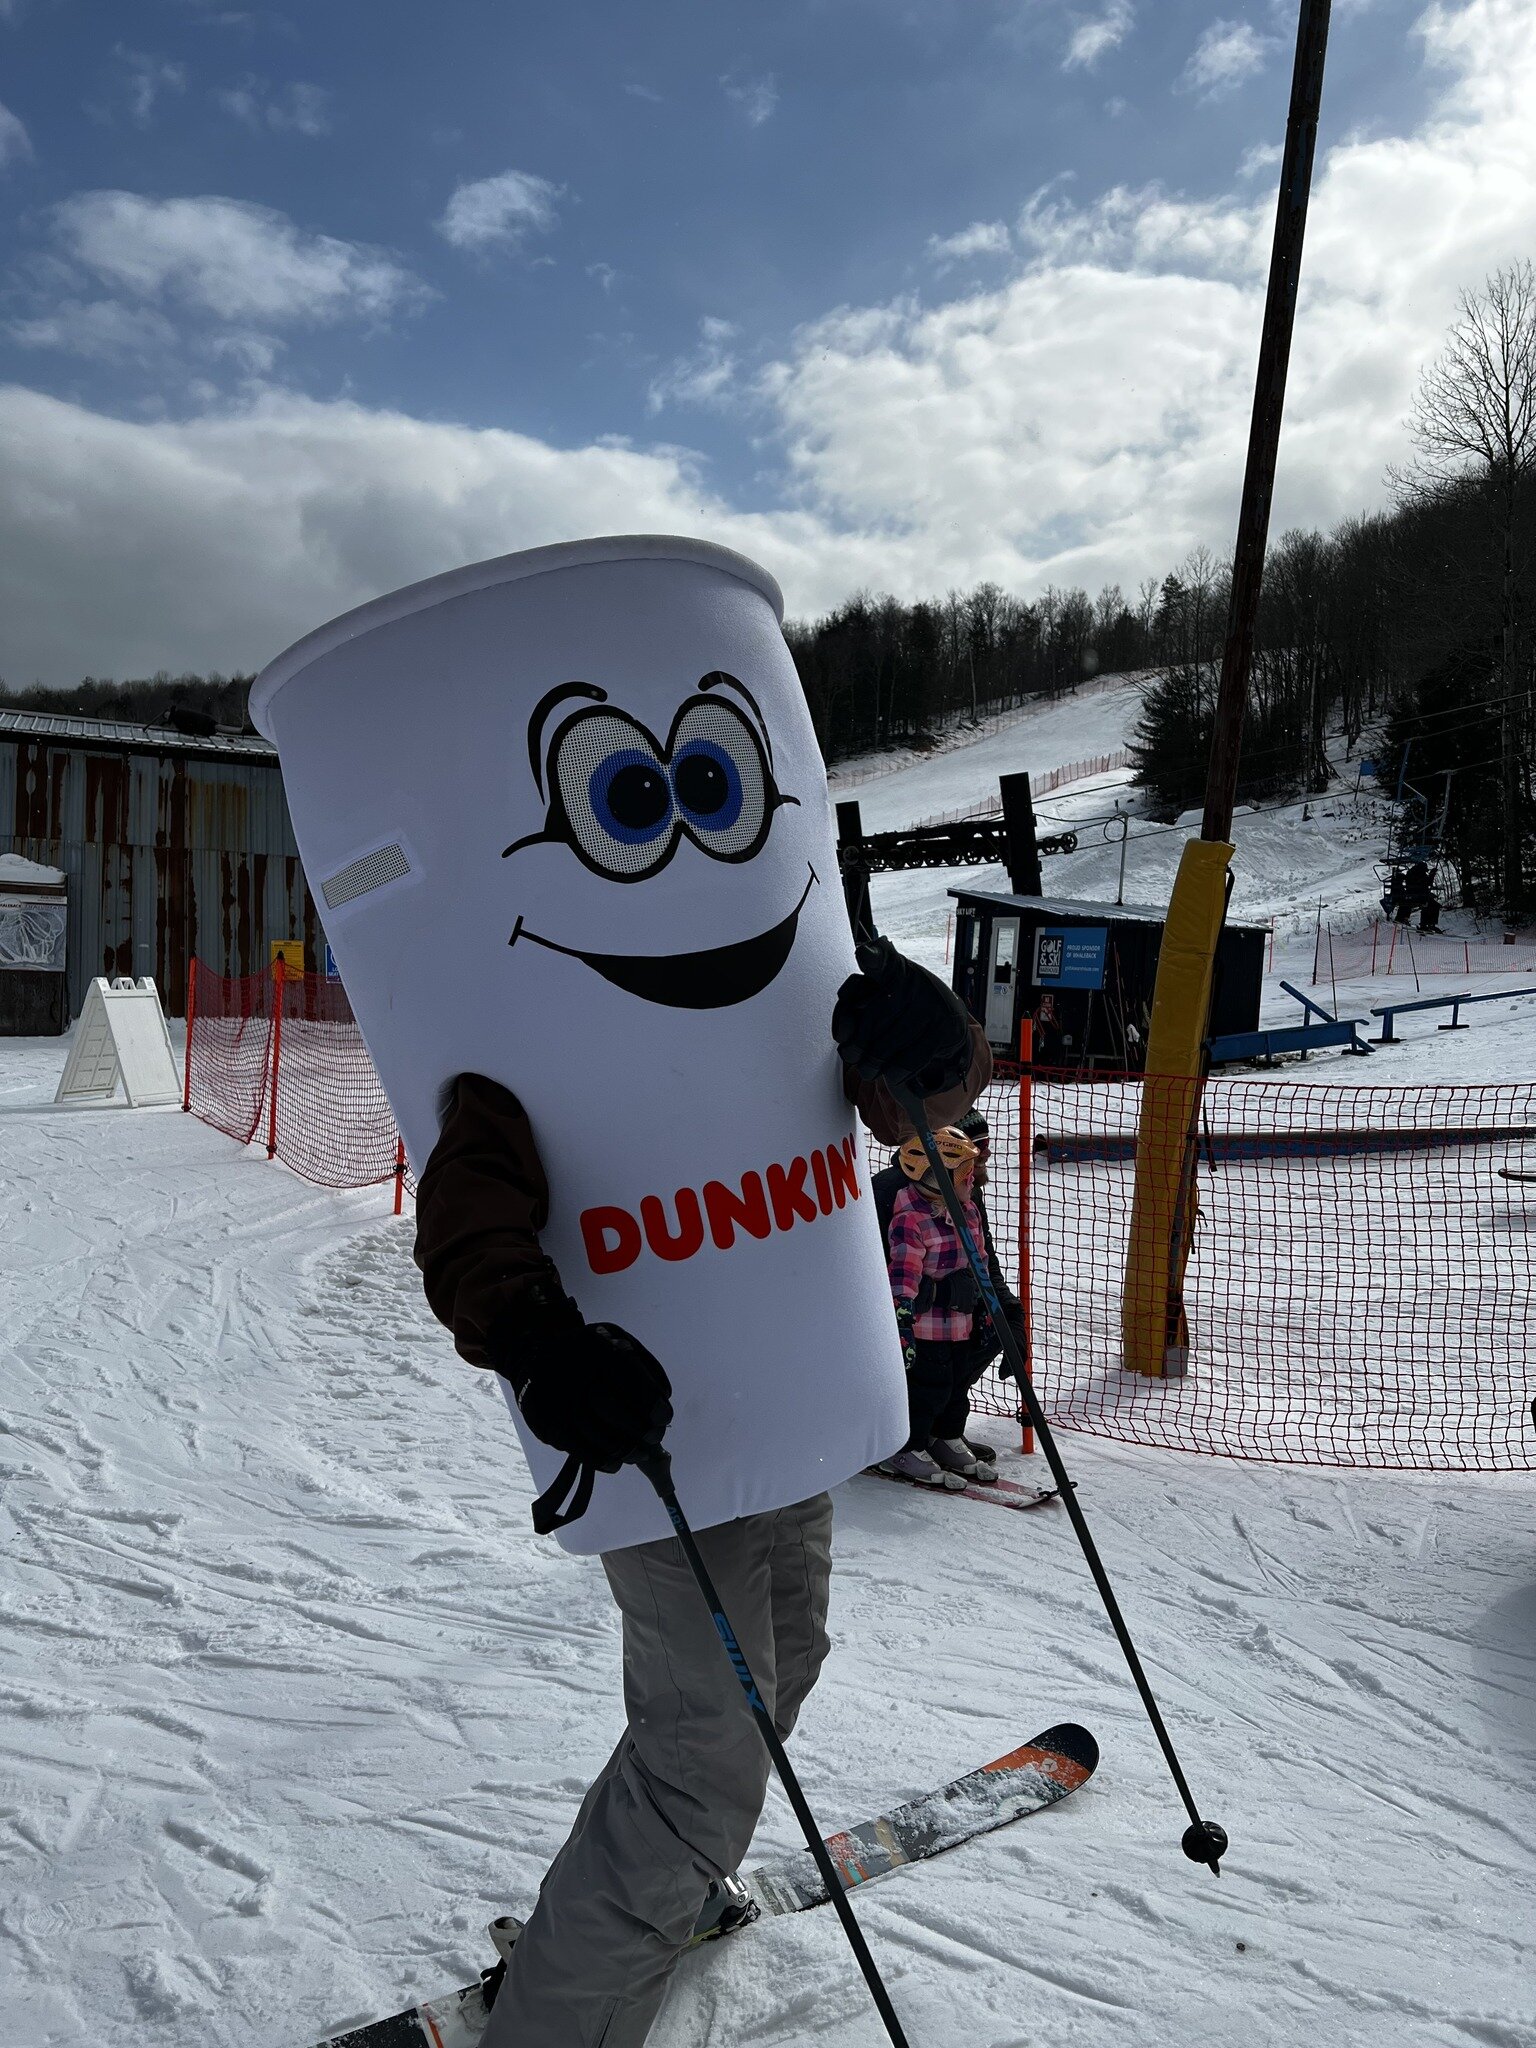 Who got to see the giant cup of coffee skiing around the mountain this weekend?  A big thanks to Dunkin' for coming out and adding to our stoke this past Sunday!